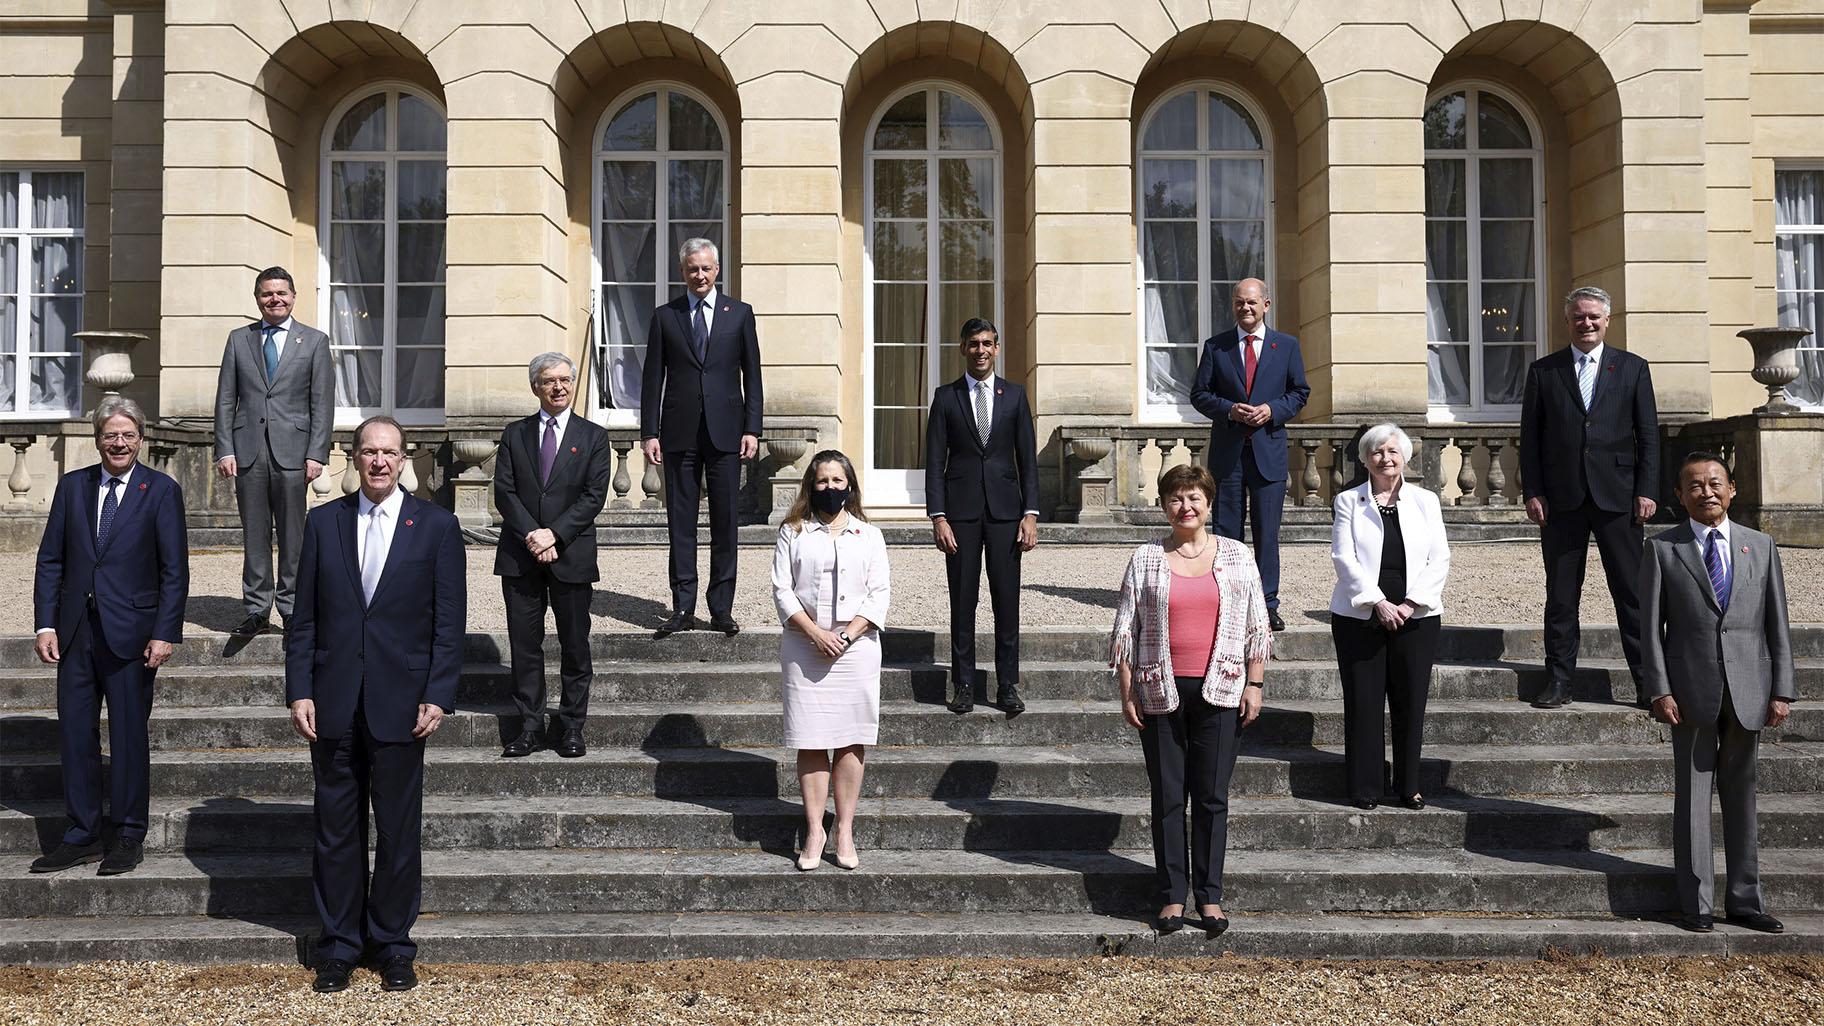 Finance ministers from across the G7 nations meet at Lancaster House in London, Saturday, June 5, 2021 ahead of the G7 leaders’ summit. (Henry Nicholls / Pool Photo via AP)